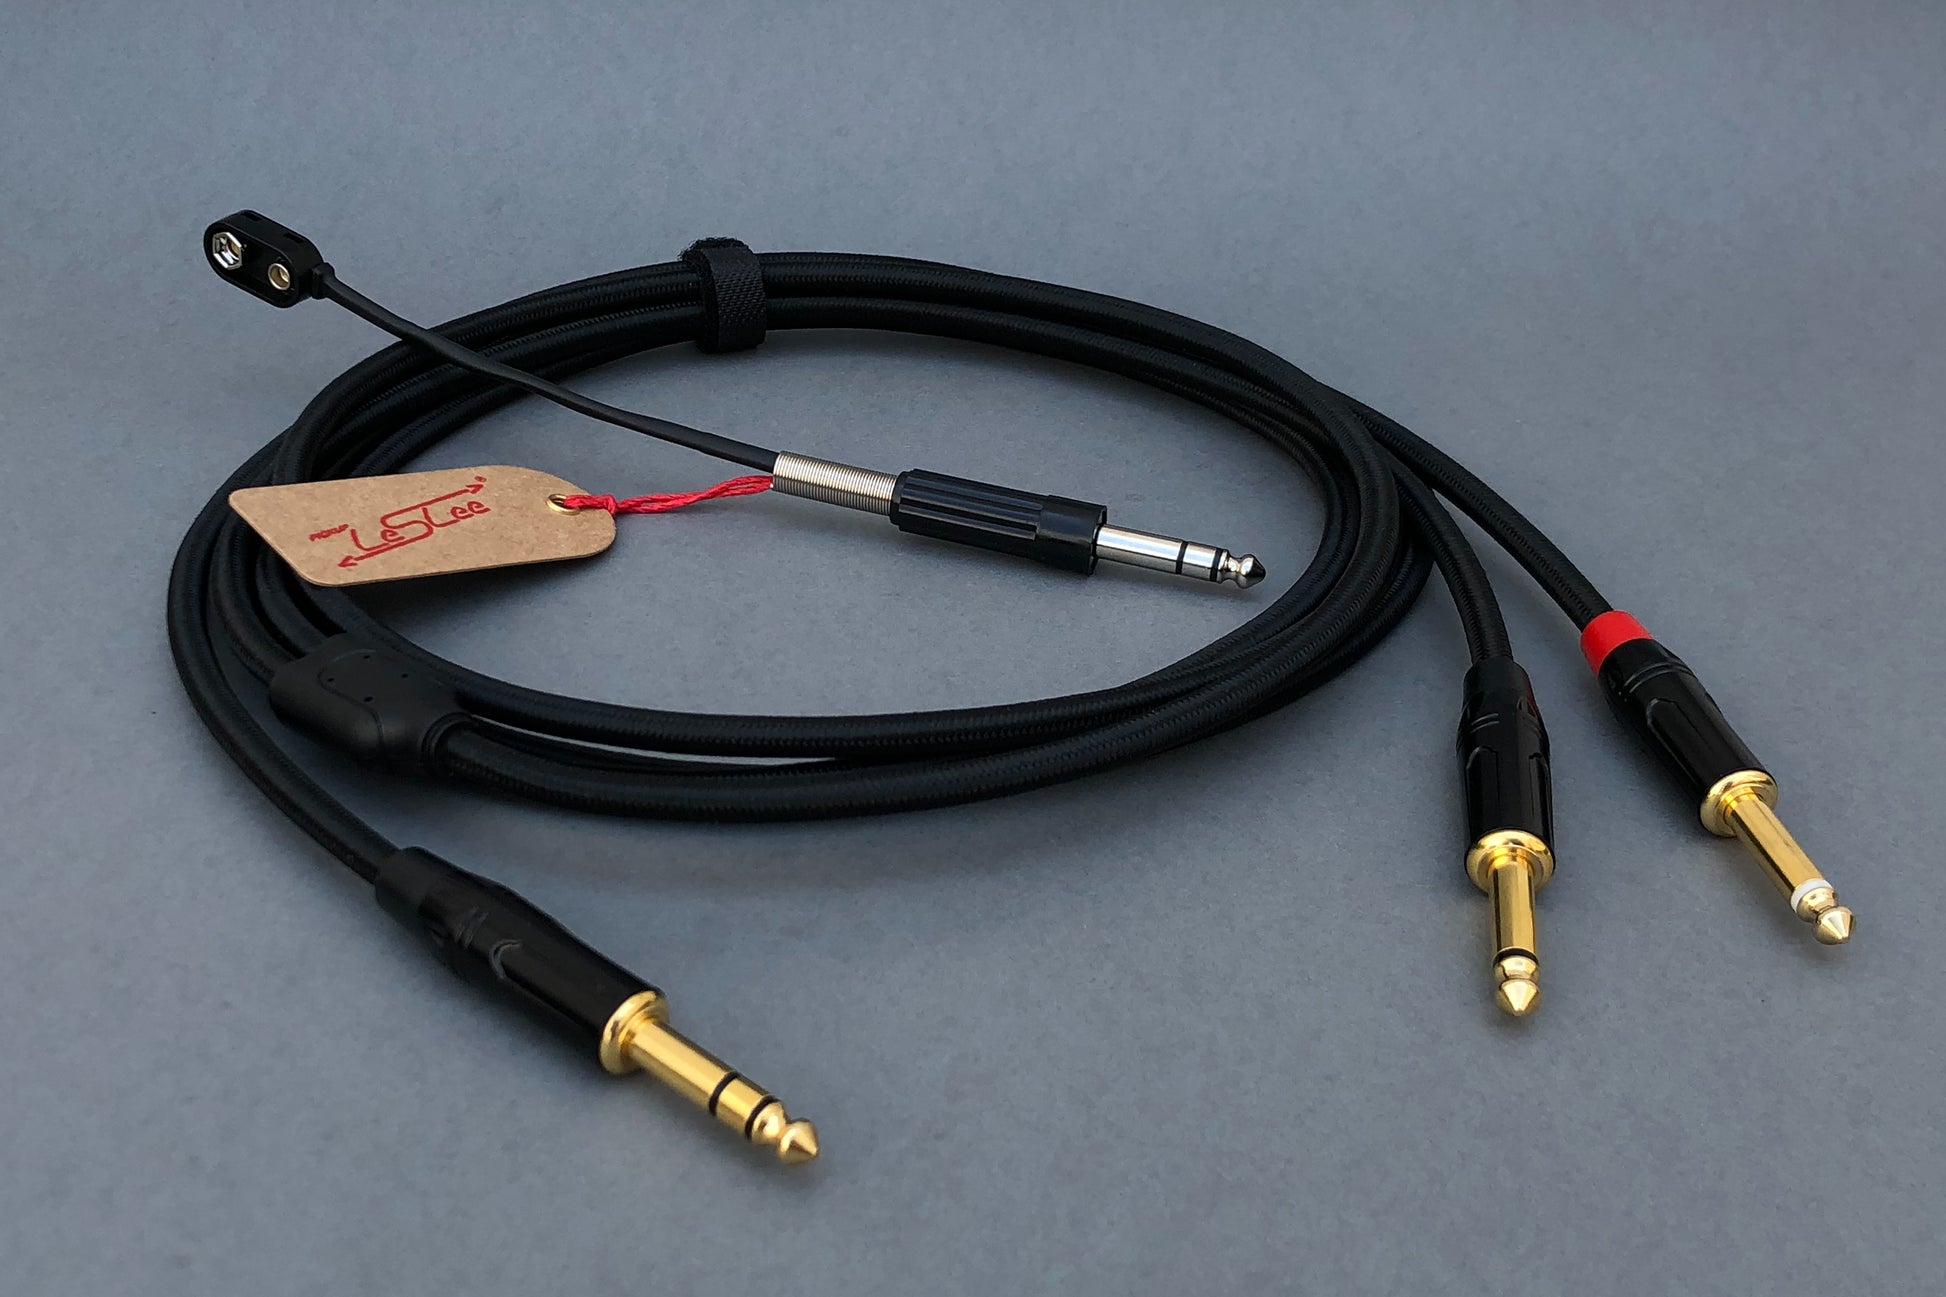 LesLee - stereo split cable